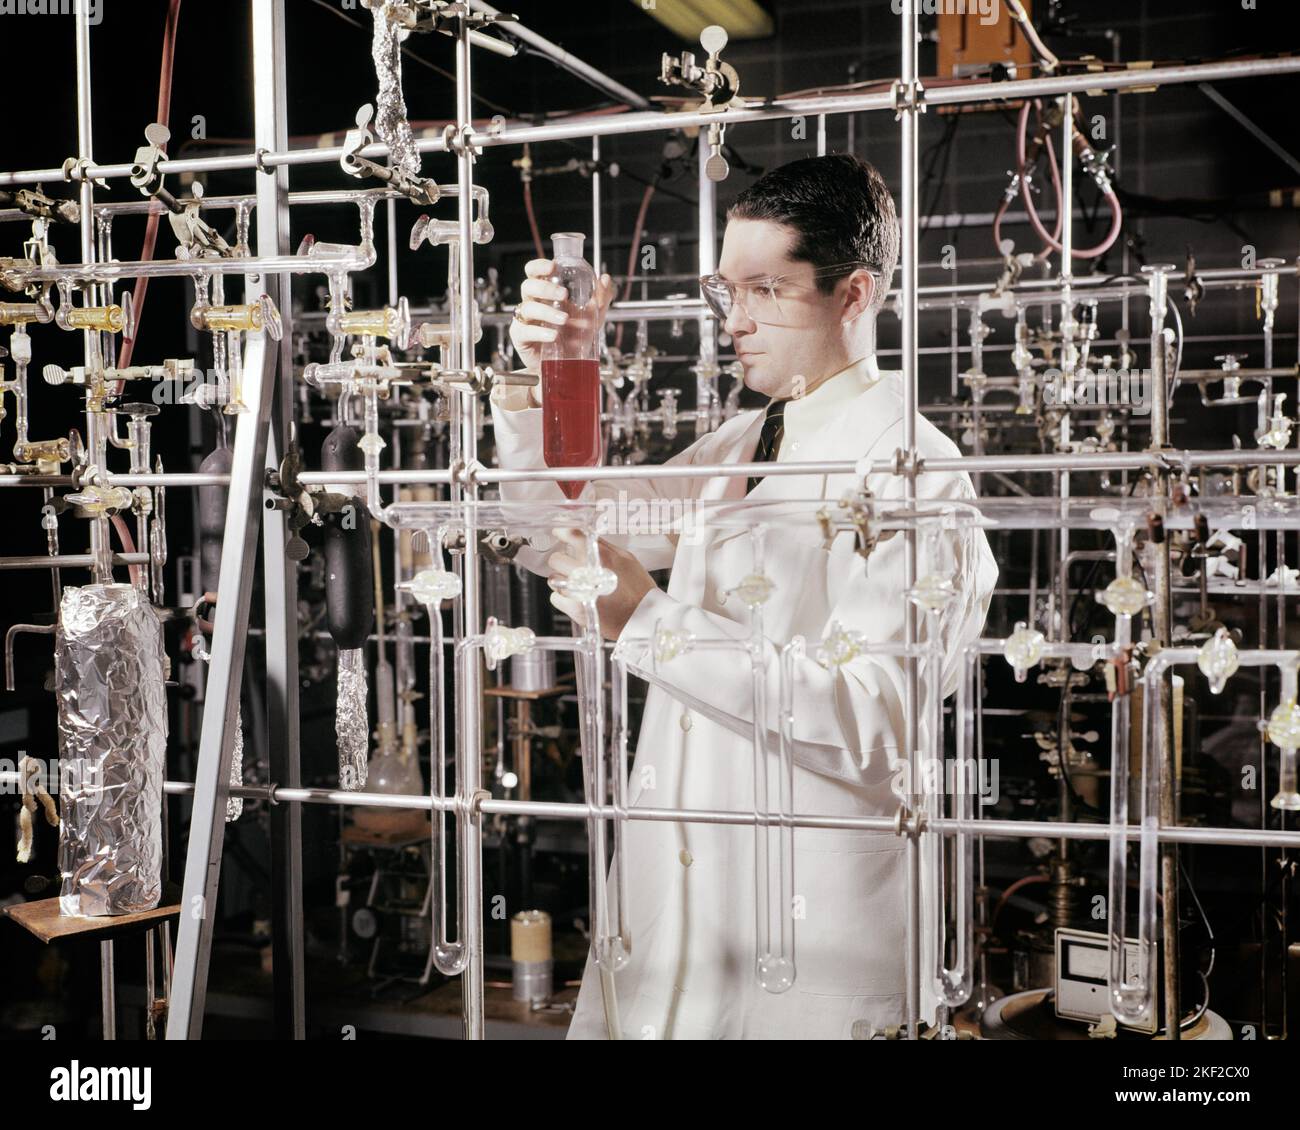 1960s MAN CHEMIST IN LAB CHECKING MEASUREMENT OF VOLUME STANDING ON VACUUM SYSTEM OF GLASS EQUIPMENT - kl2323 HAR001 HARS MEASUREMENT GOALS OCCUPATION UNIVERSITIES CHEMIST SCIENTIFIC CAREERS IN OF OCCUPATIONS HIGHER EDUCATION COLLEGES MID-ADULT MID-ADULT MAN PRECISION SOLUTIONS YOUNG ADULT MAN AMID CAUCASIAN ETHNICITY HAR001 LABORATORIES LABS OLD FASHIONED VOLUME Stock Photo